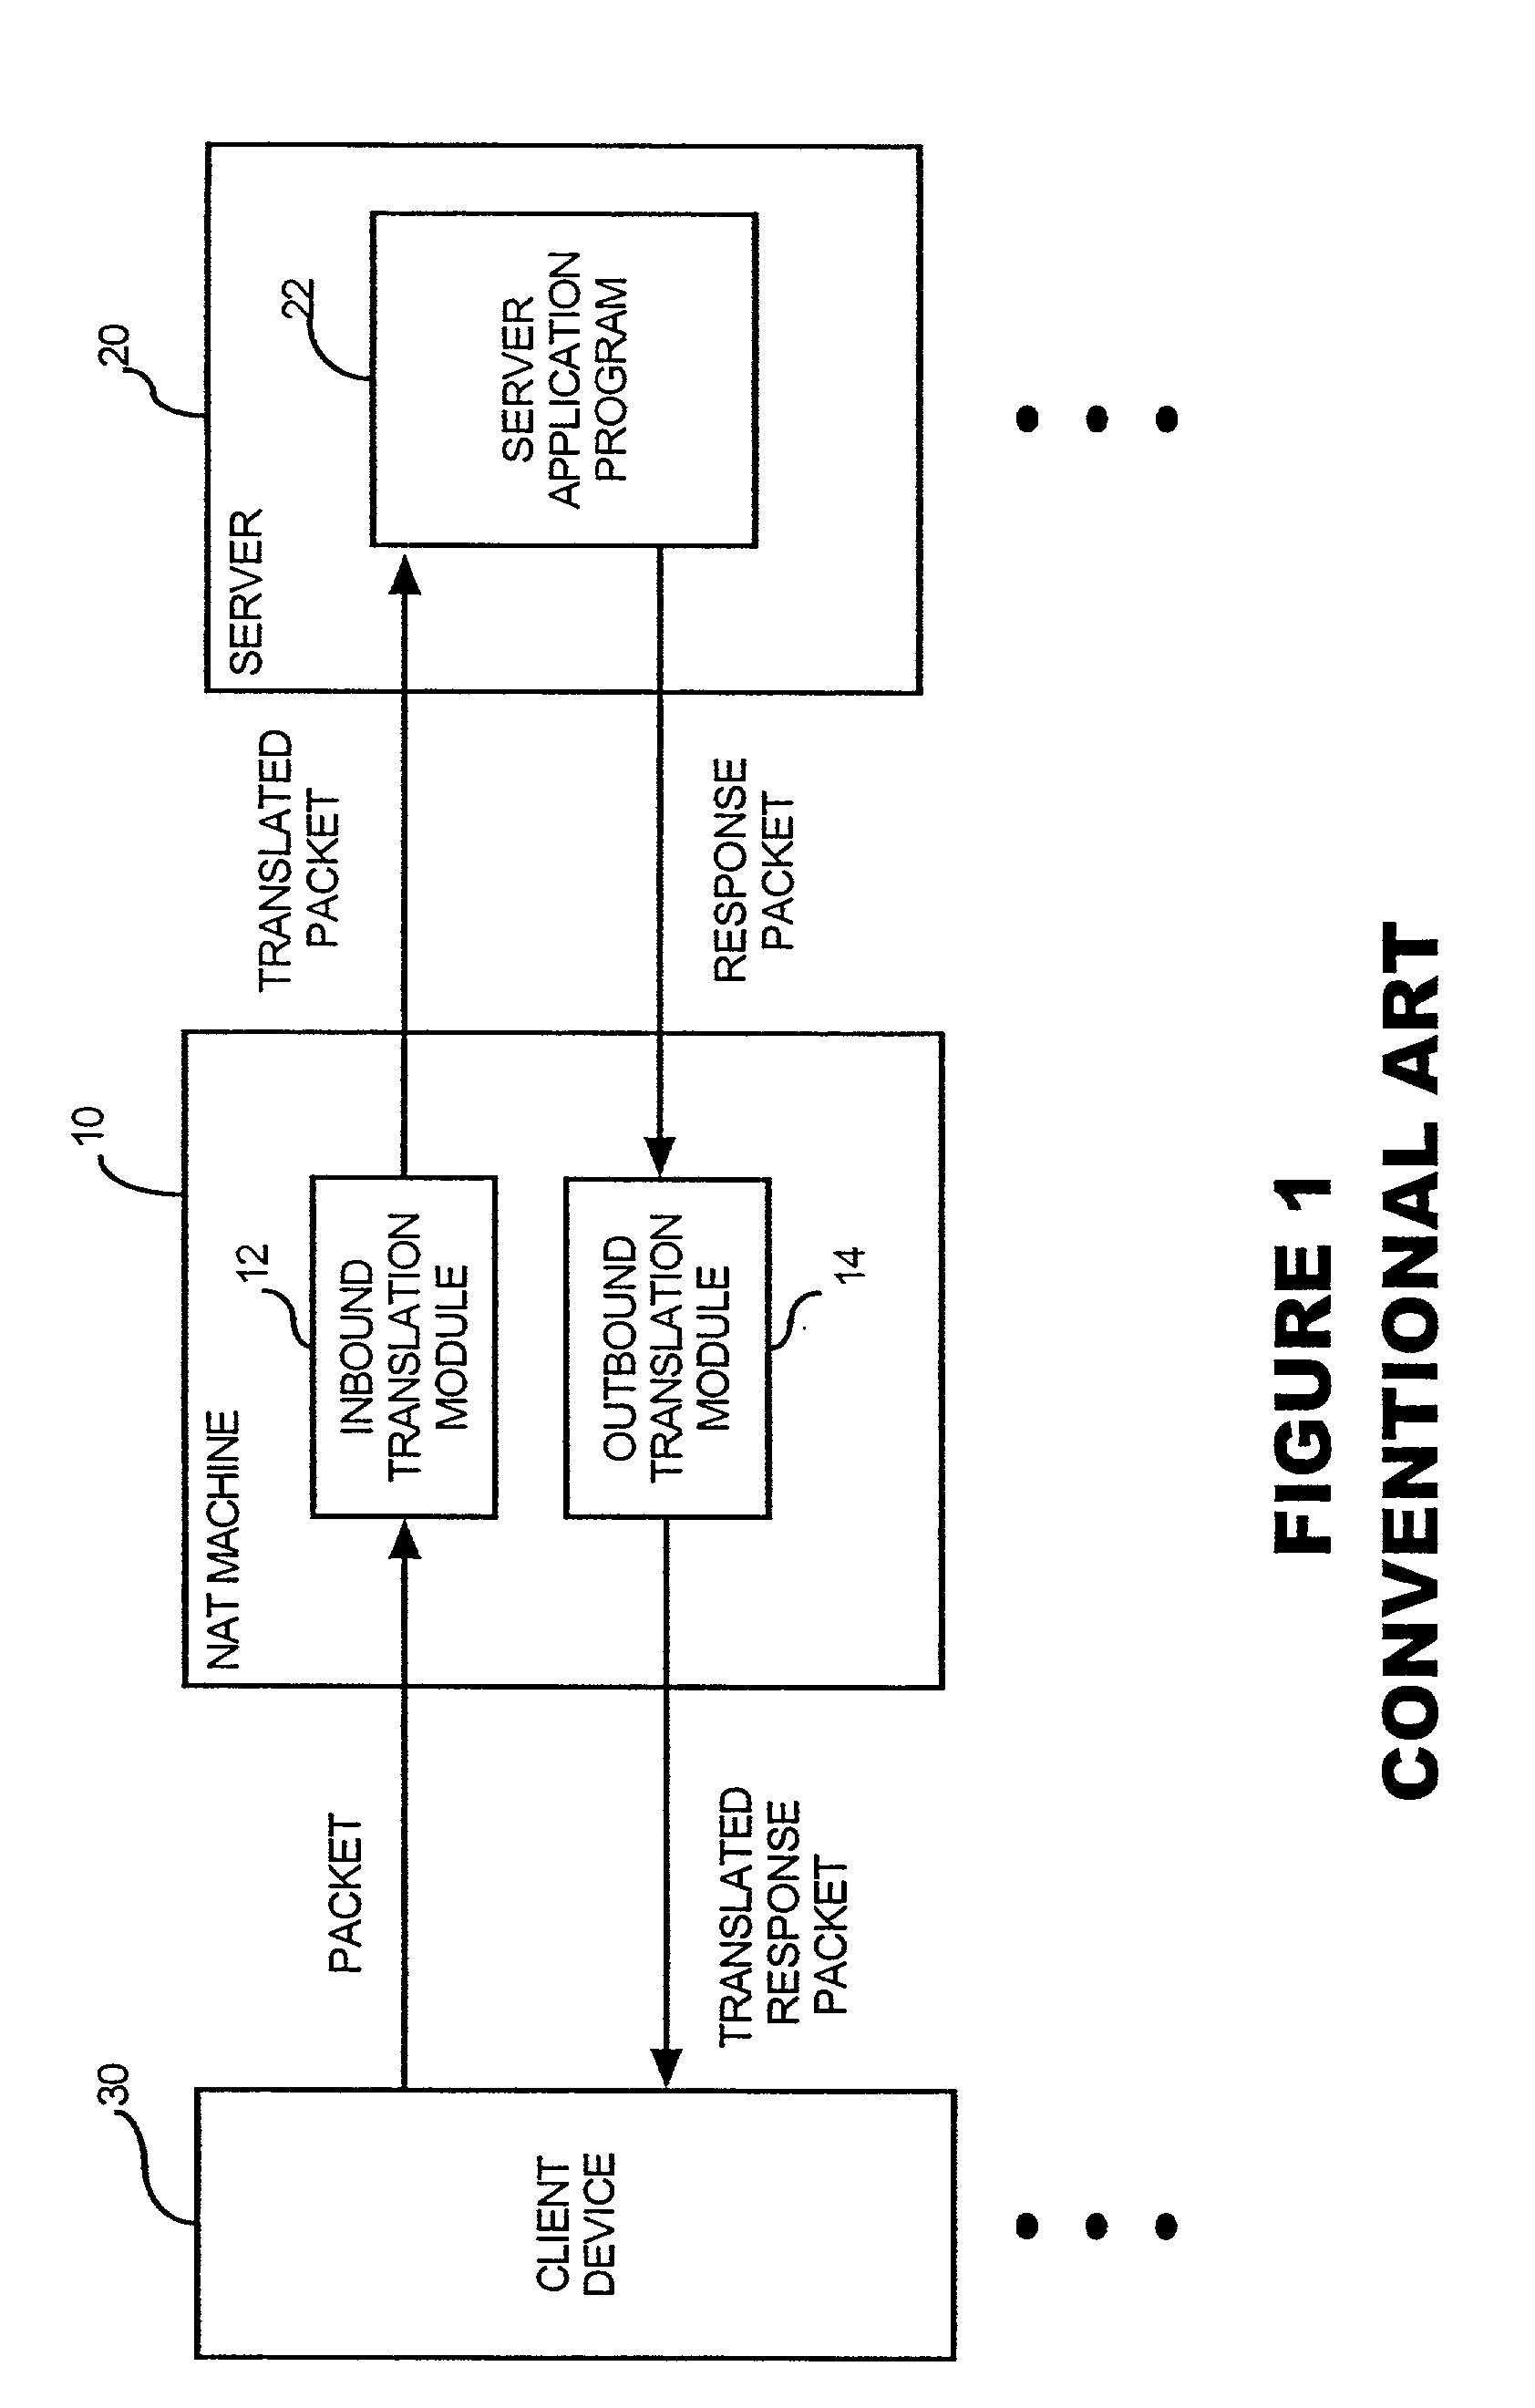 Network address translation and port mapping